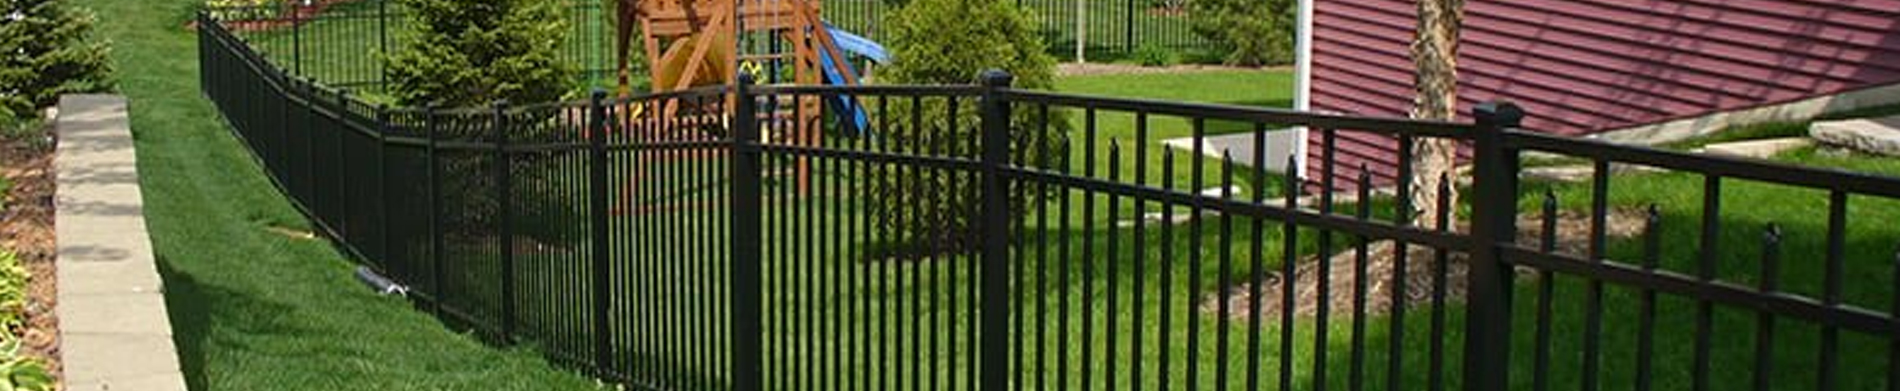 Deck up your garden area with a 3-rail ranch fence from Duramax